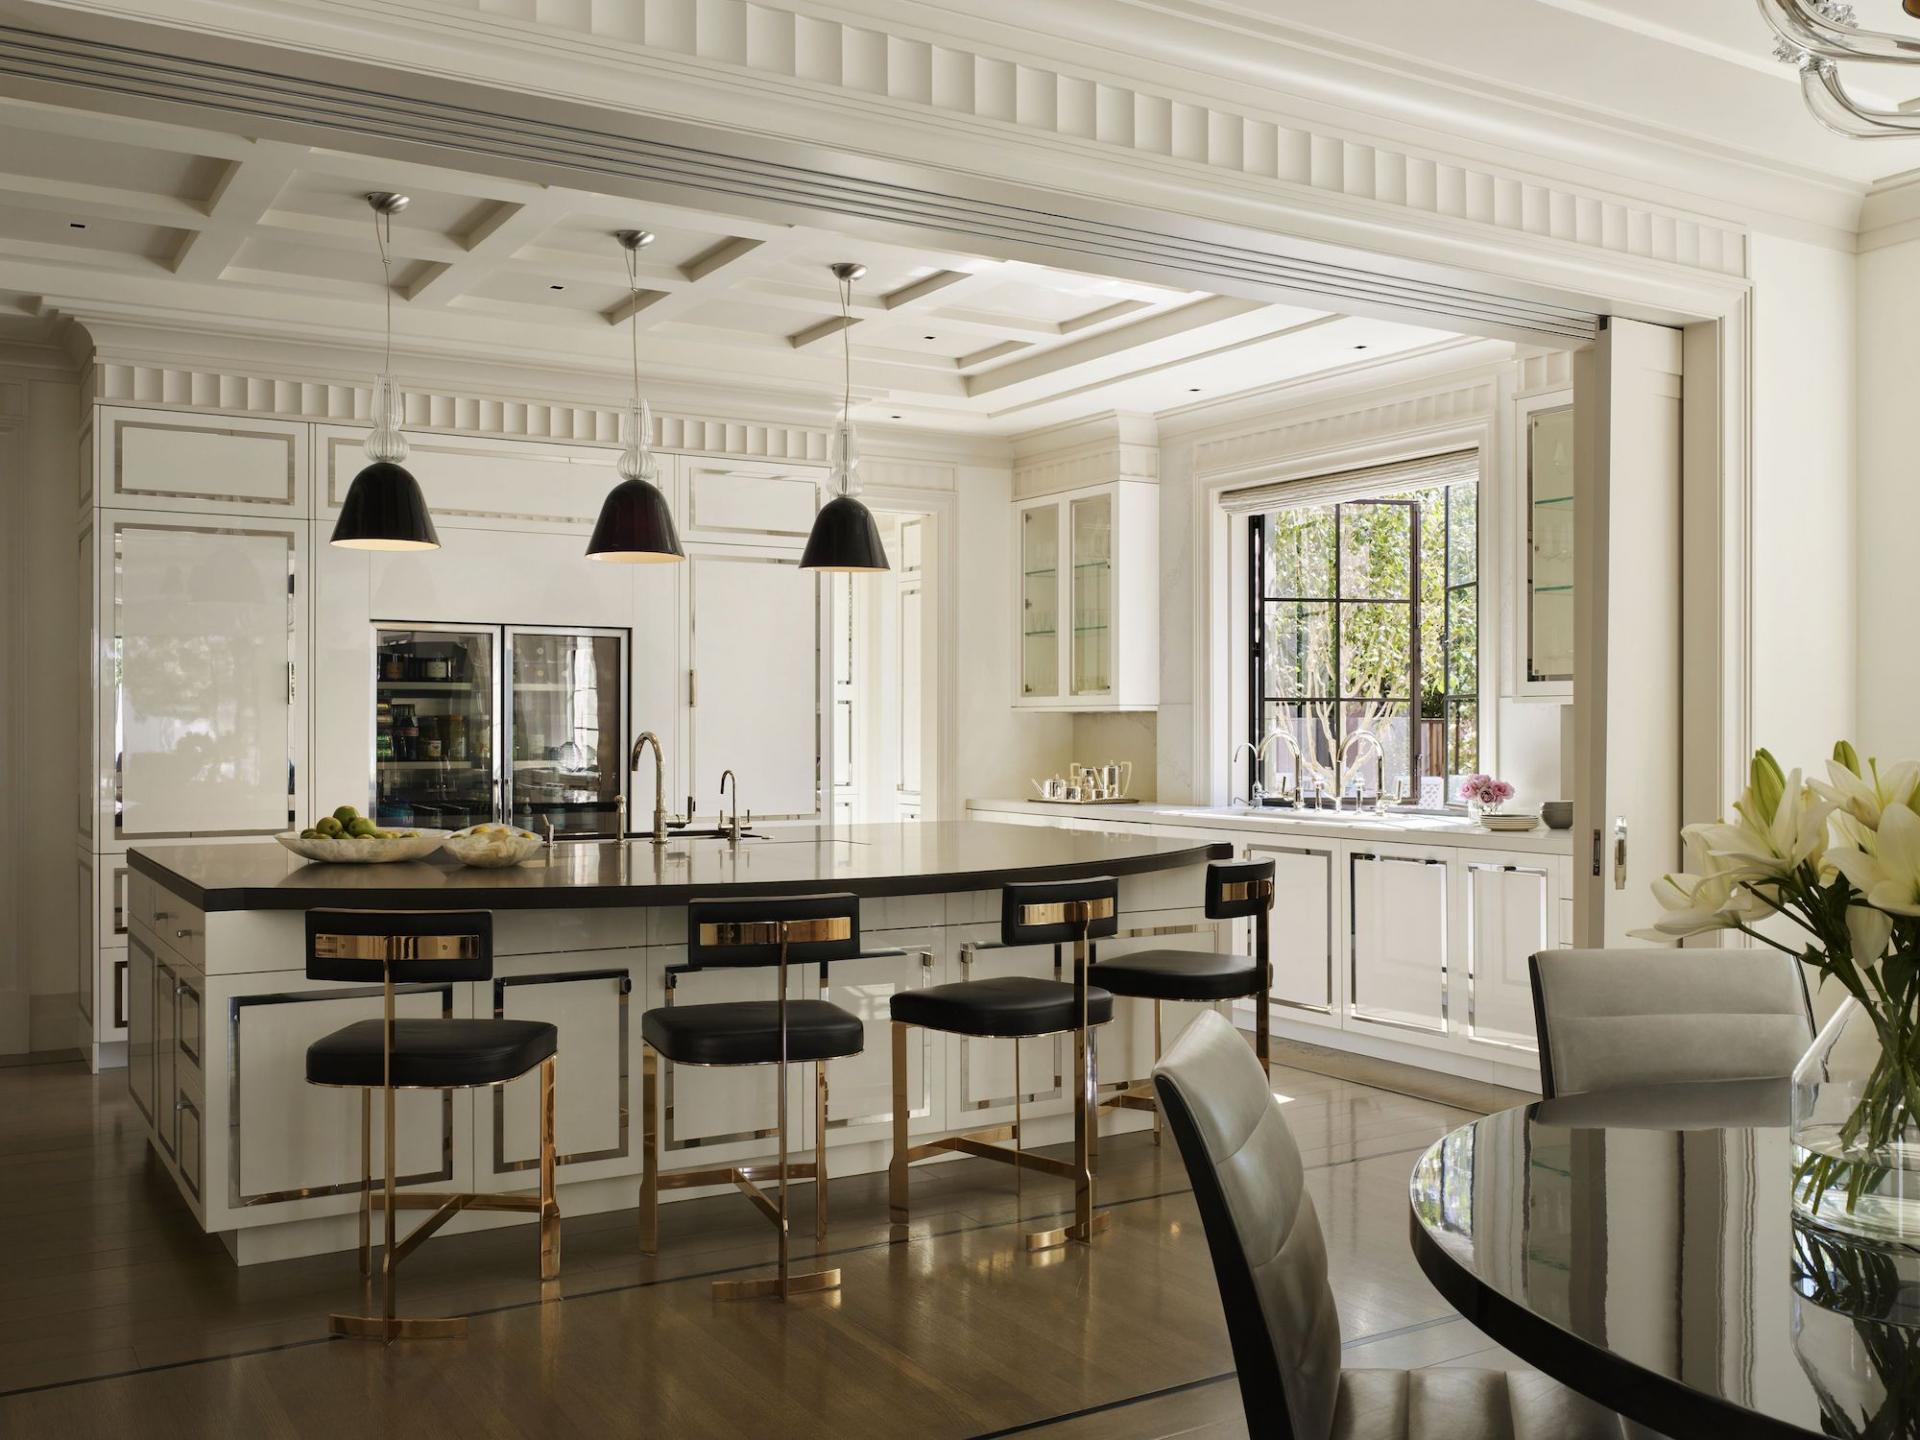 Tour an Art Deco and French Château Inspired Home in California